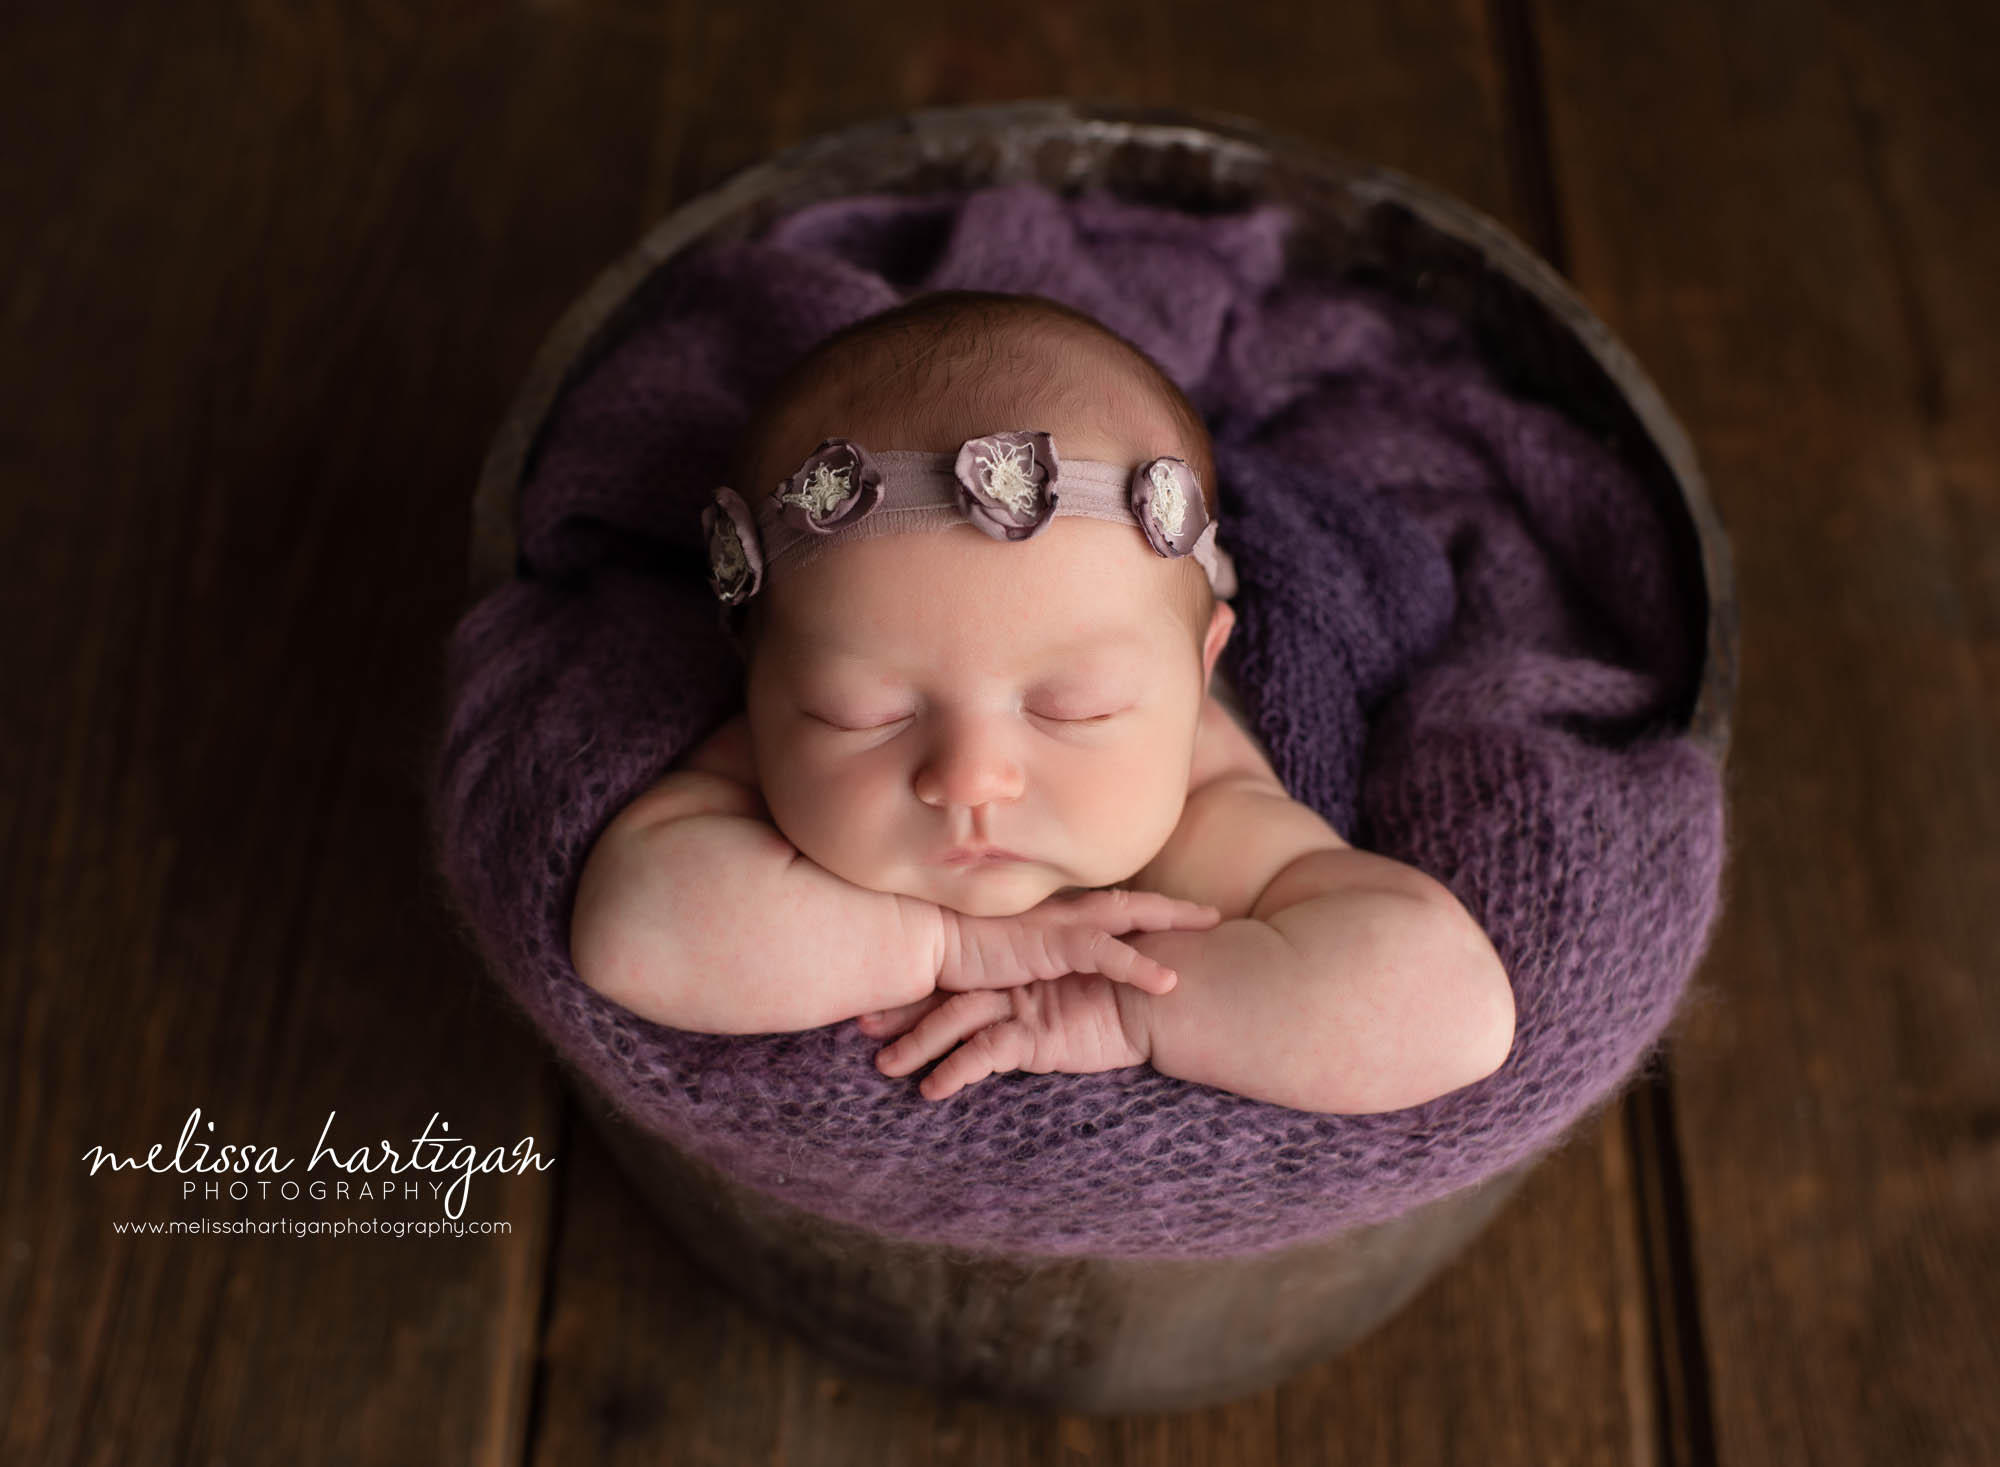 Baby girl posed in bucket woth purple wrap and purple flower headband